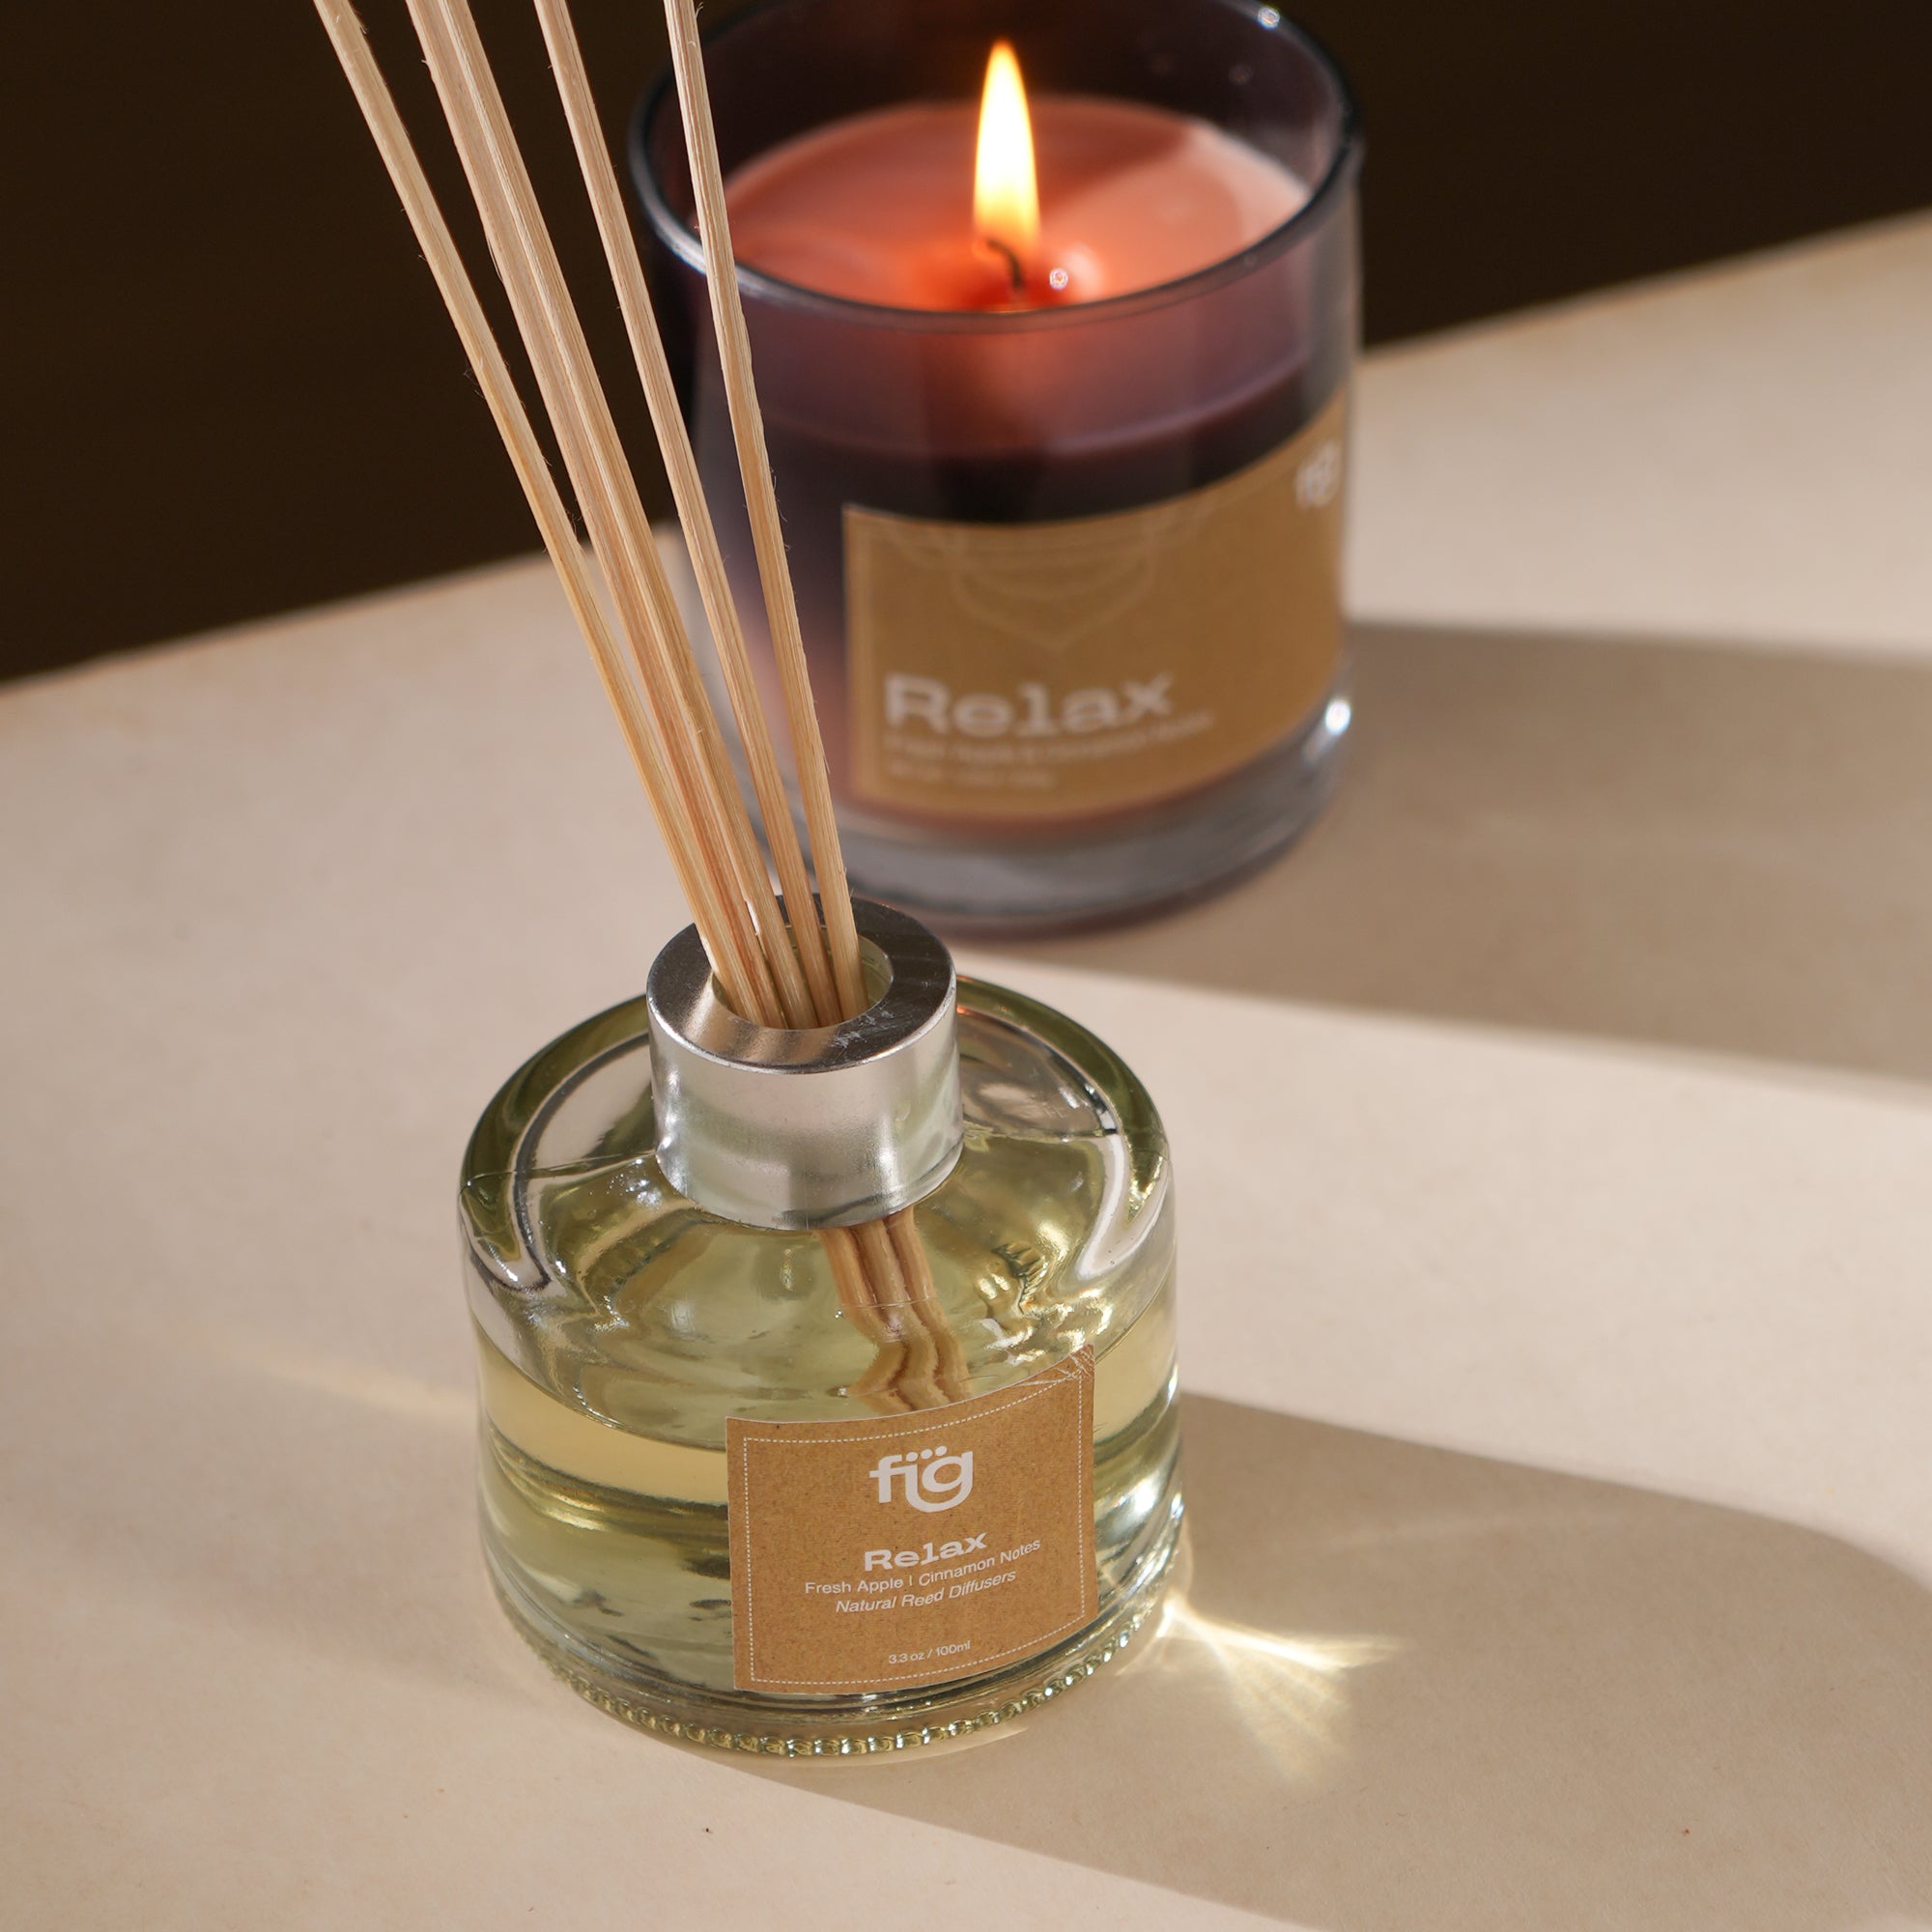 Relax Apple and Cinamon Reed Diffusor - IFRA standard perfumes